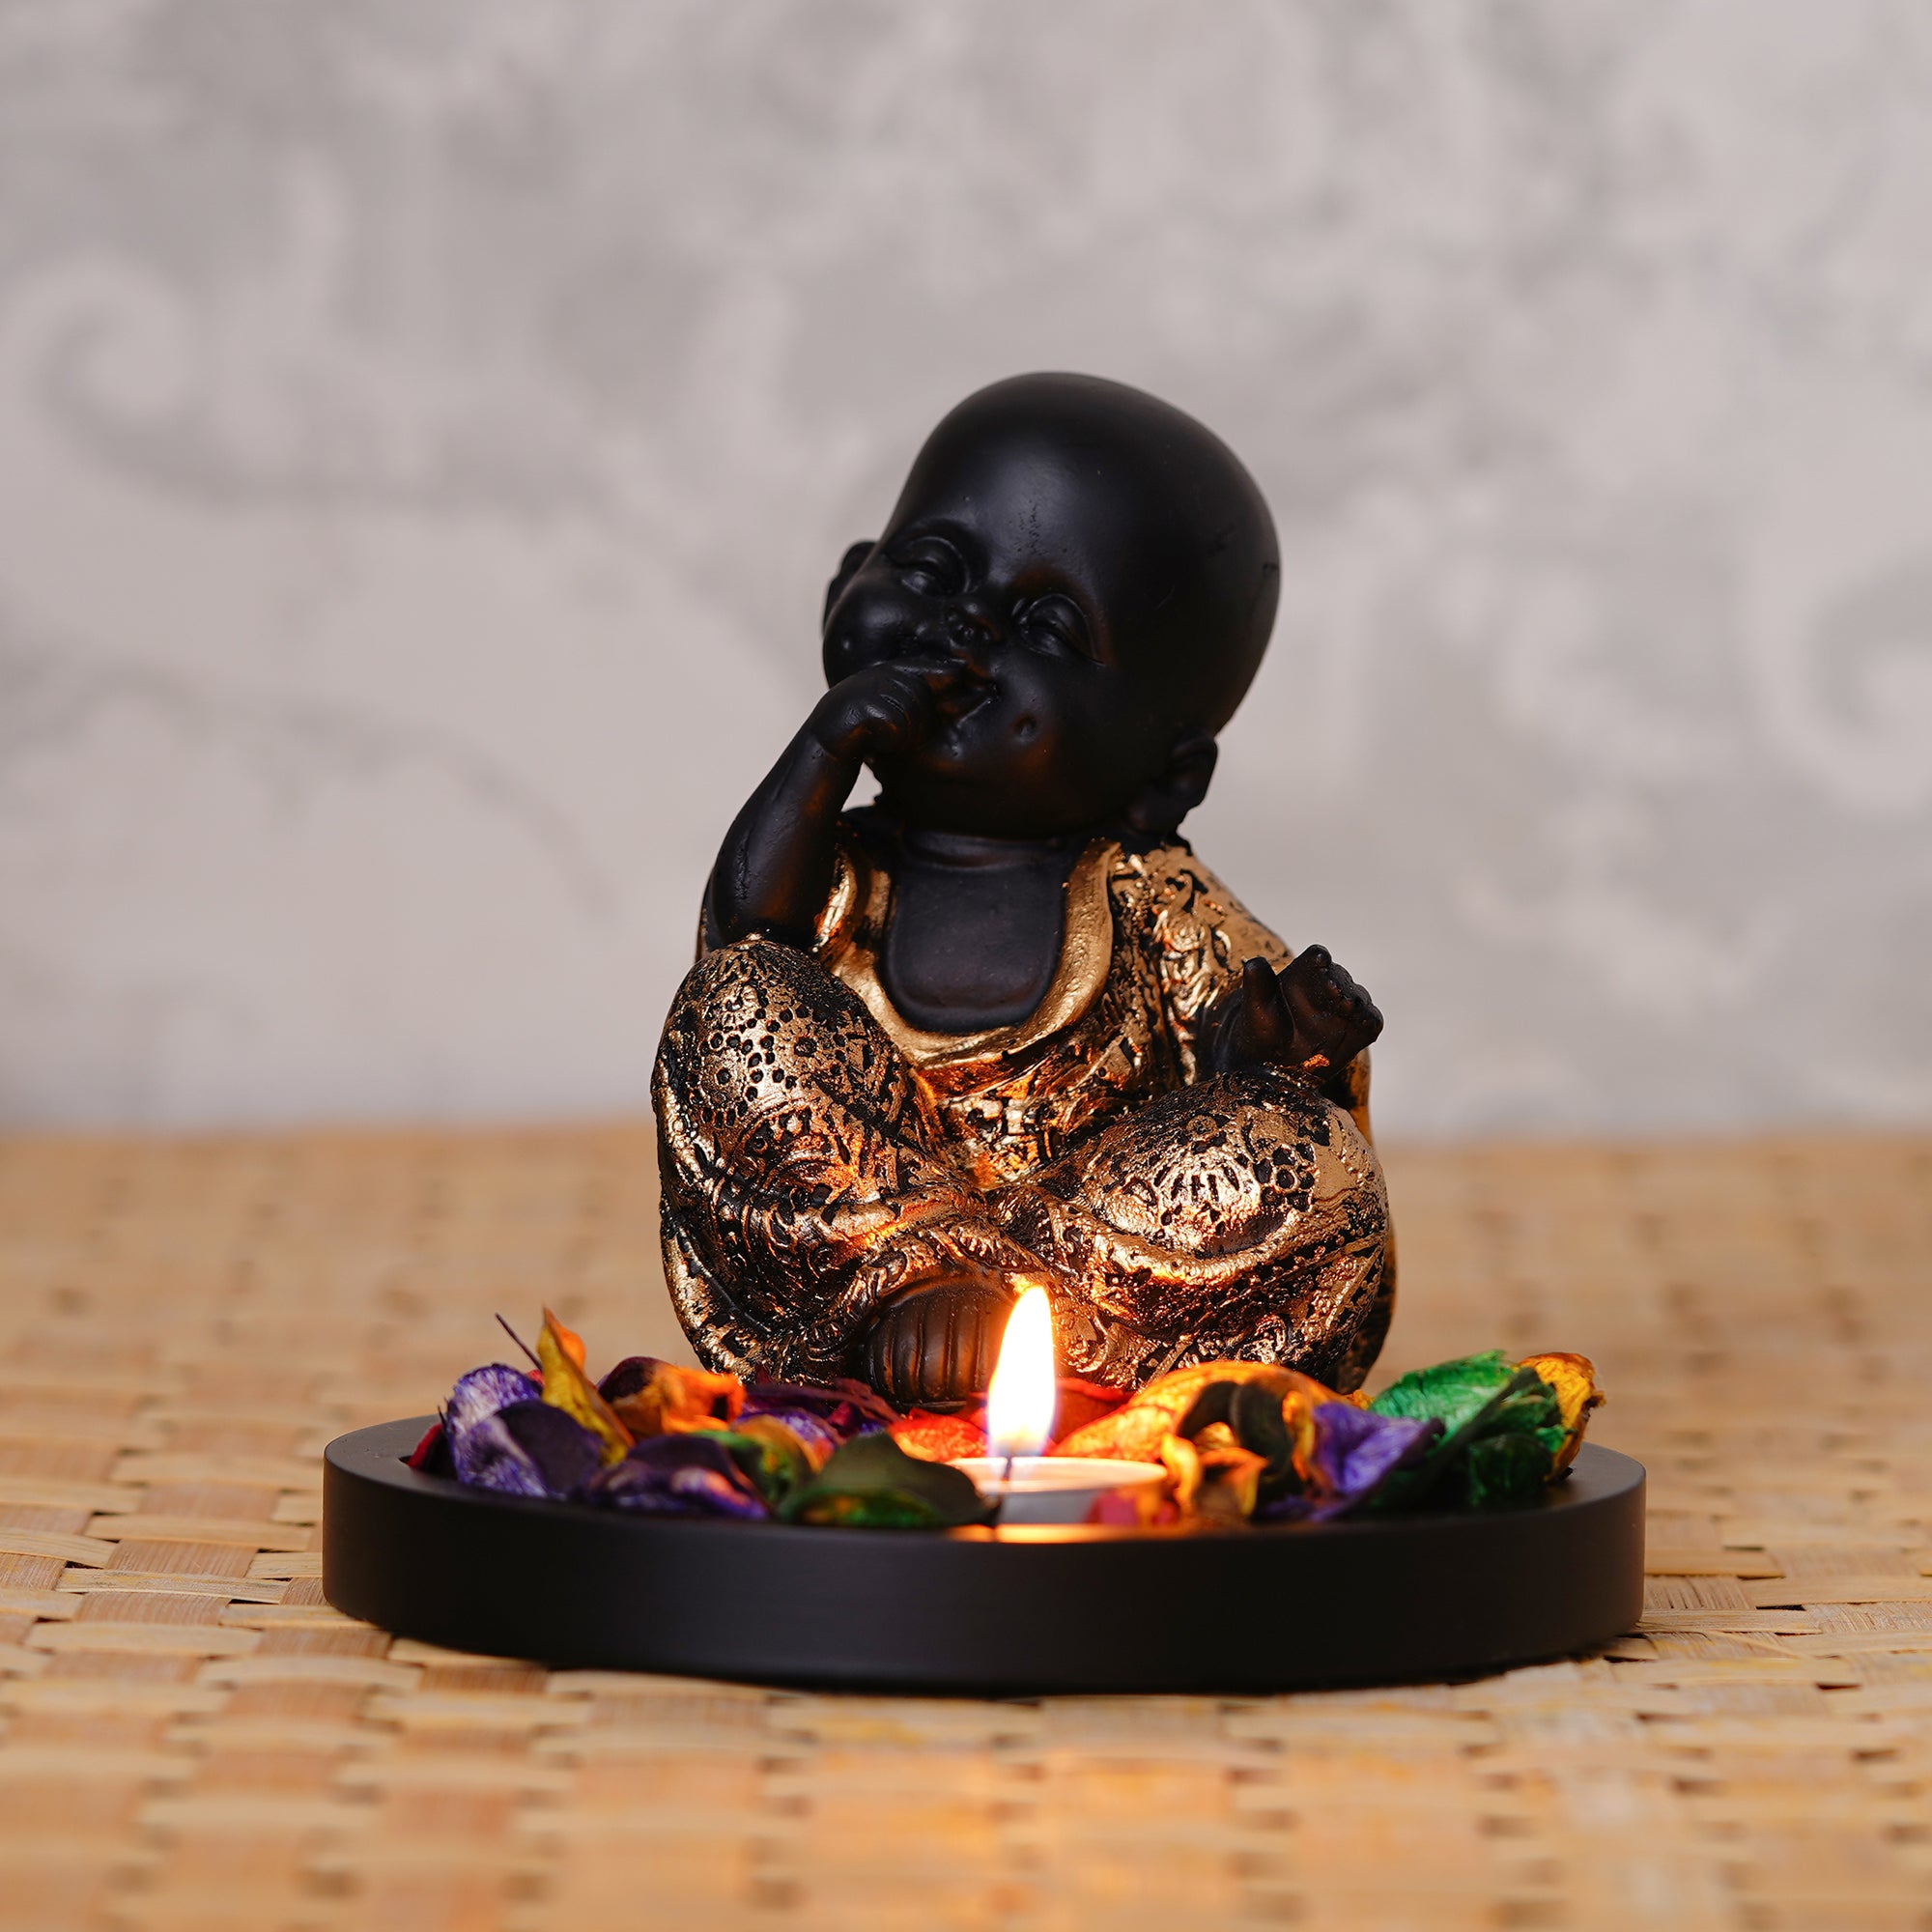 Decorative Smiling Golden Monk Buddha with Wooden Base, Fragranced Petals and Tealight